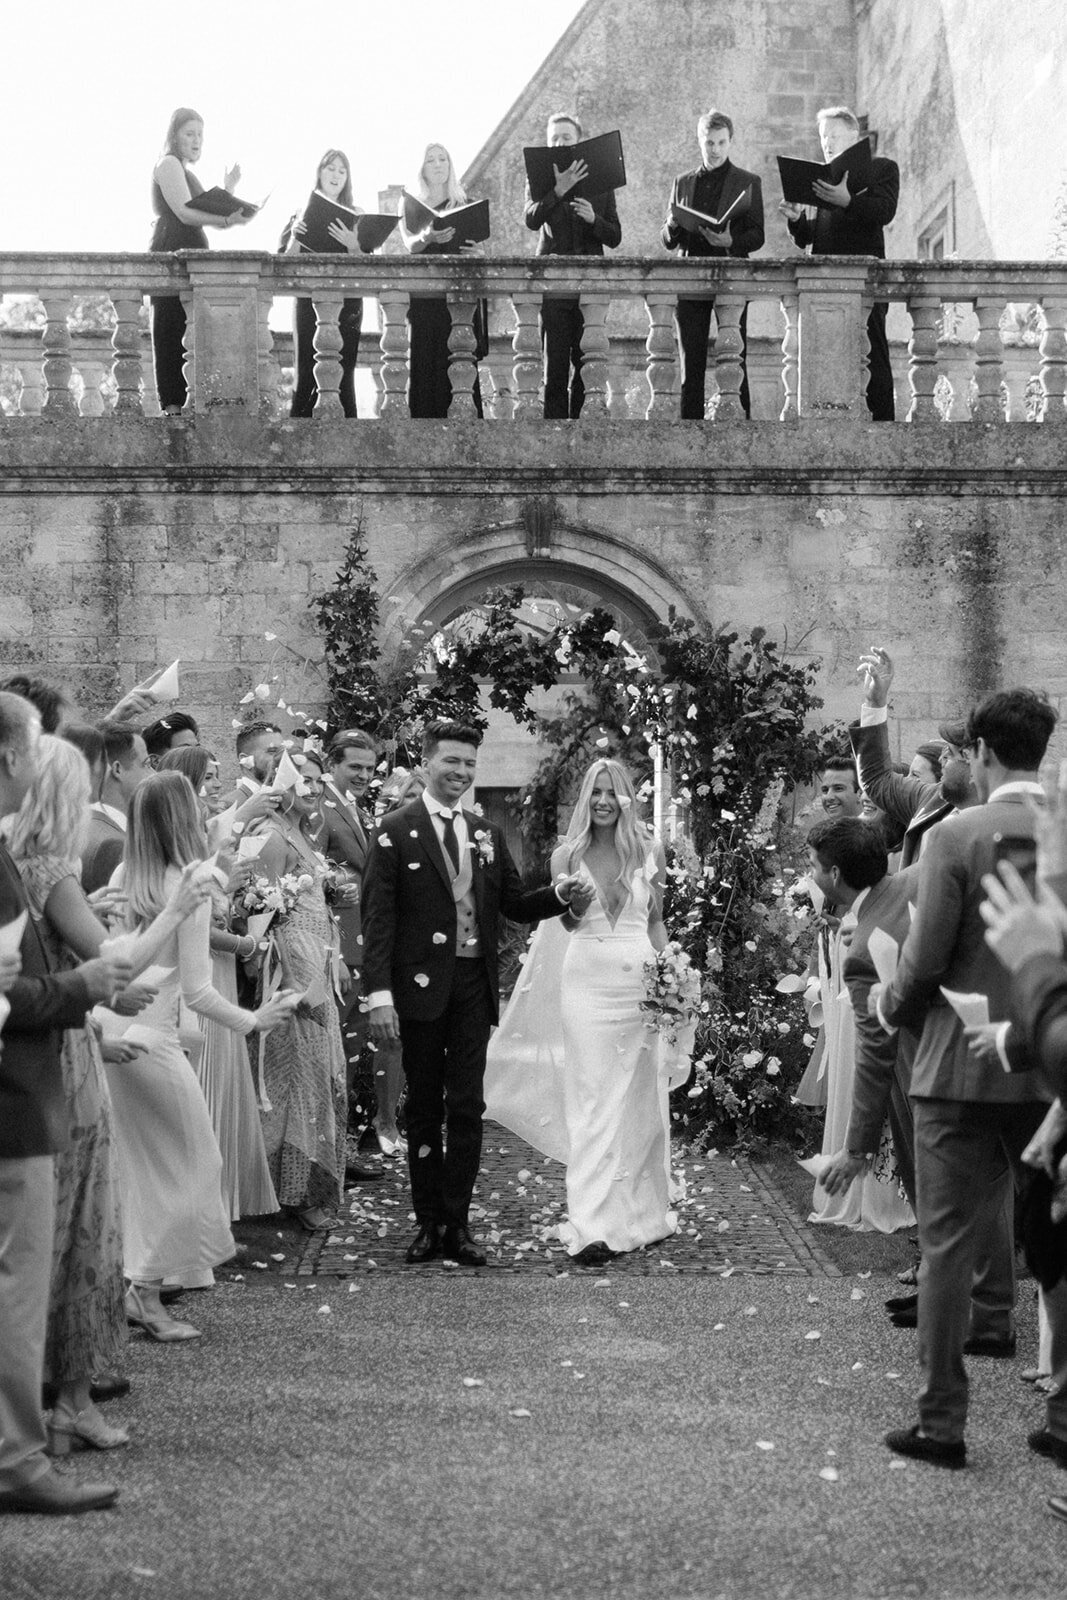 Attabara Studio UK Luxury Wedding Planners Private Estate Marquee Wedding with Rebecca Rees2 Attabara Studio UK Luxury Wedding Planners Private Estate Marquee Wedding with Rebecca Rees66